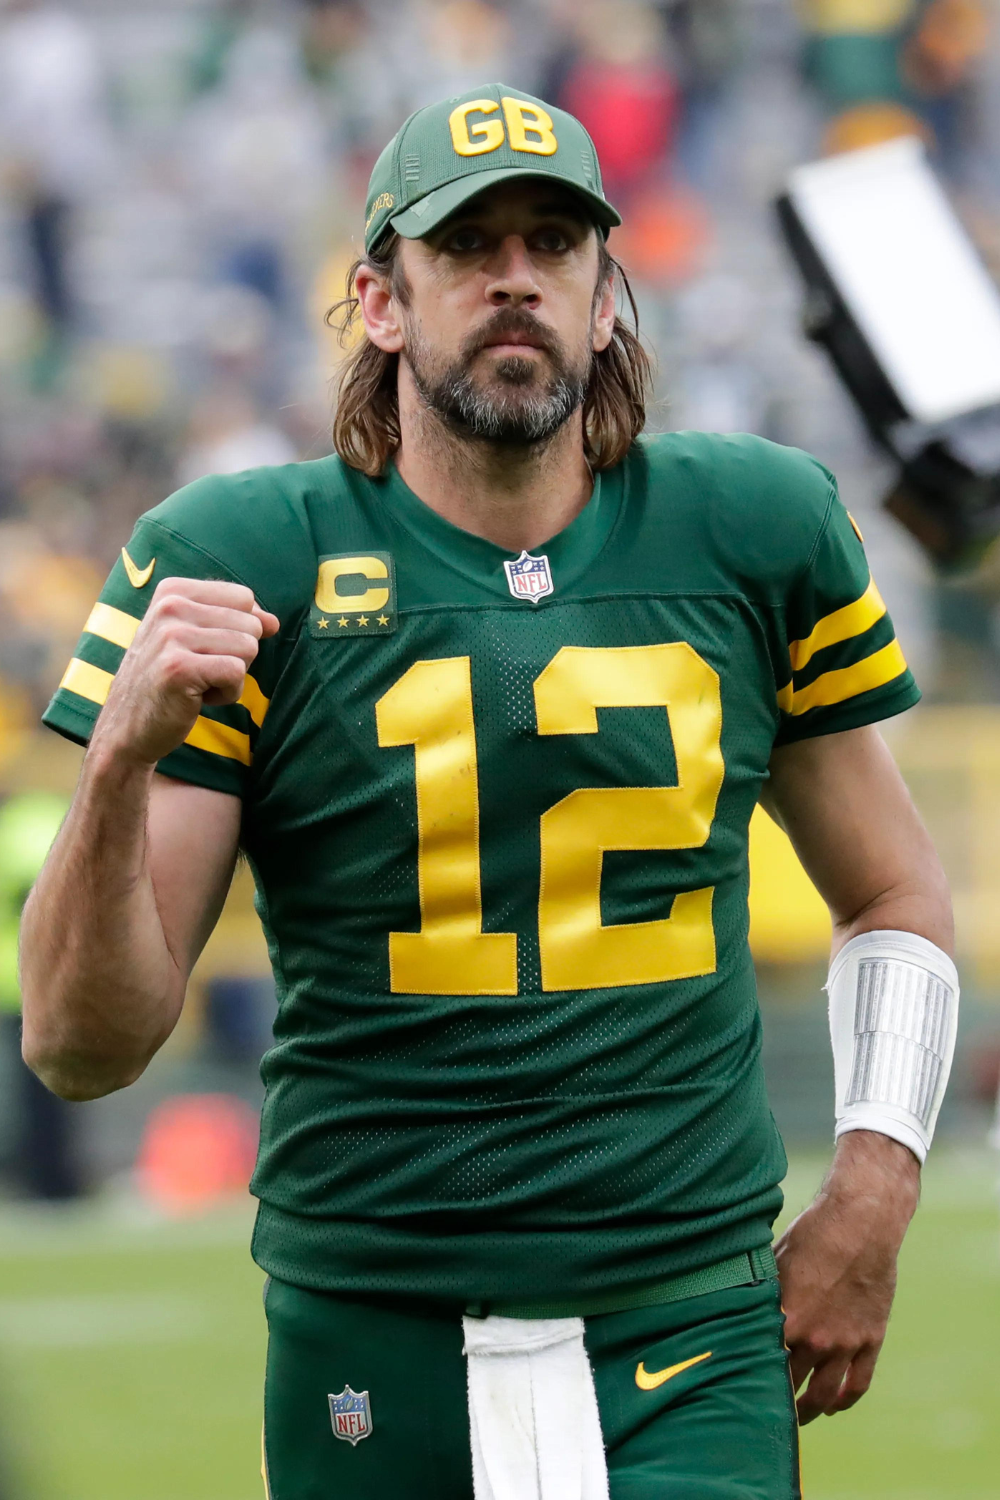 Aaron Rodgers, A Professional NFL Player